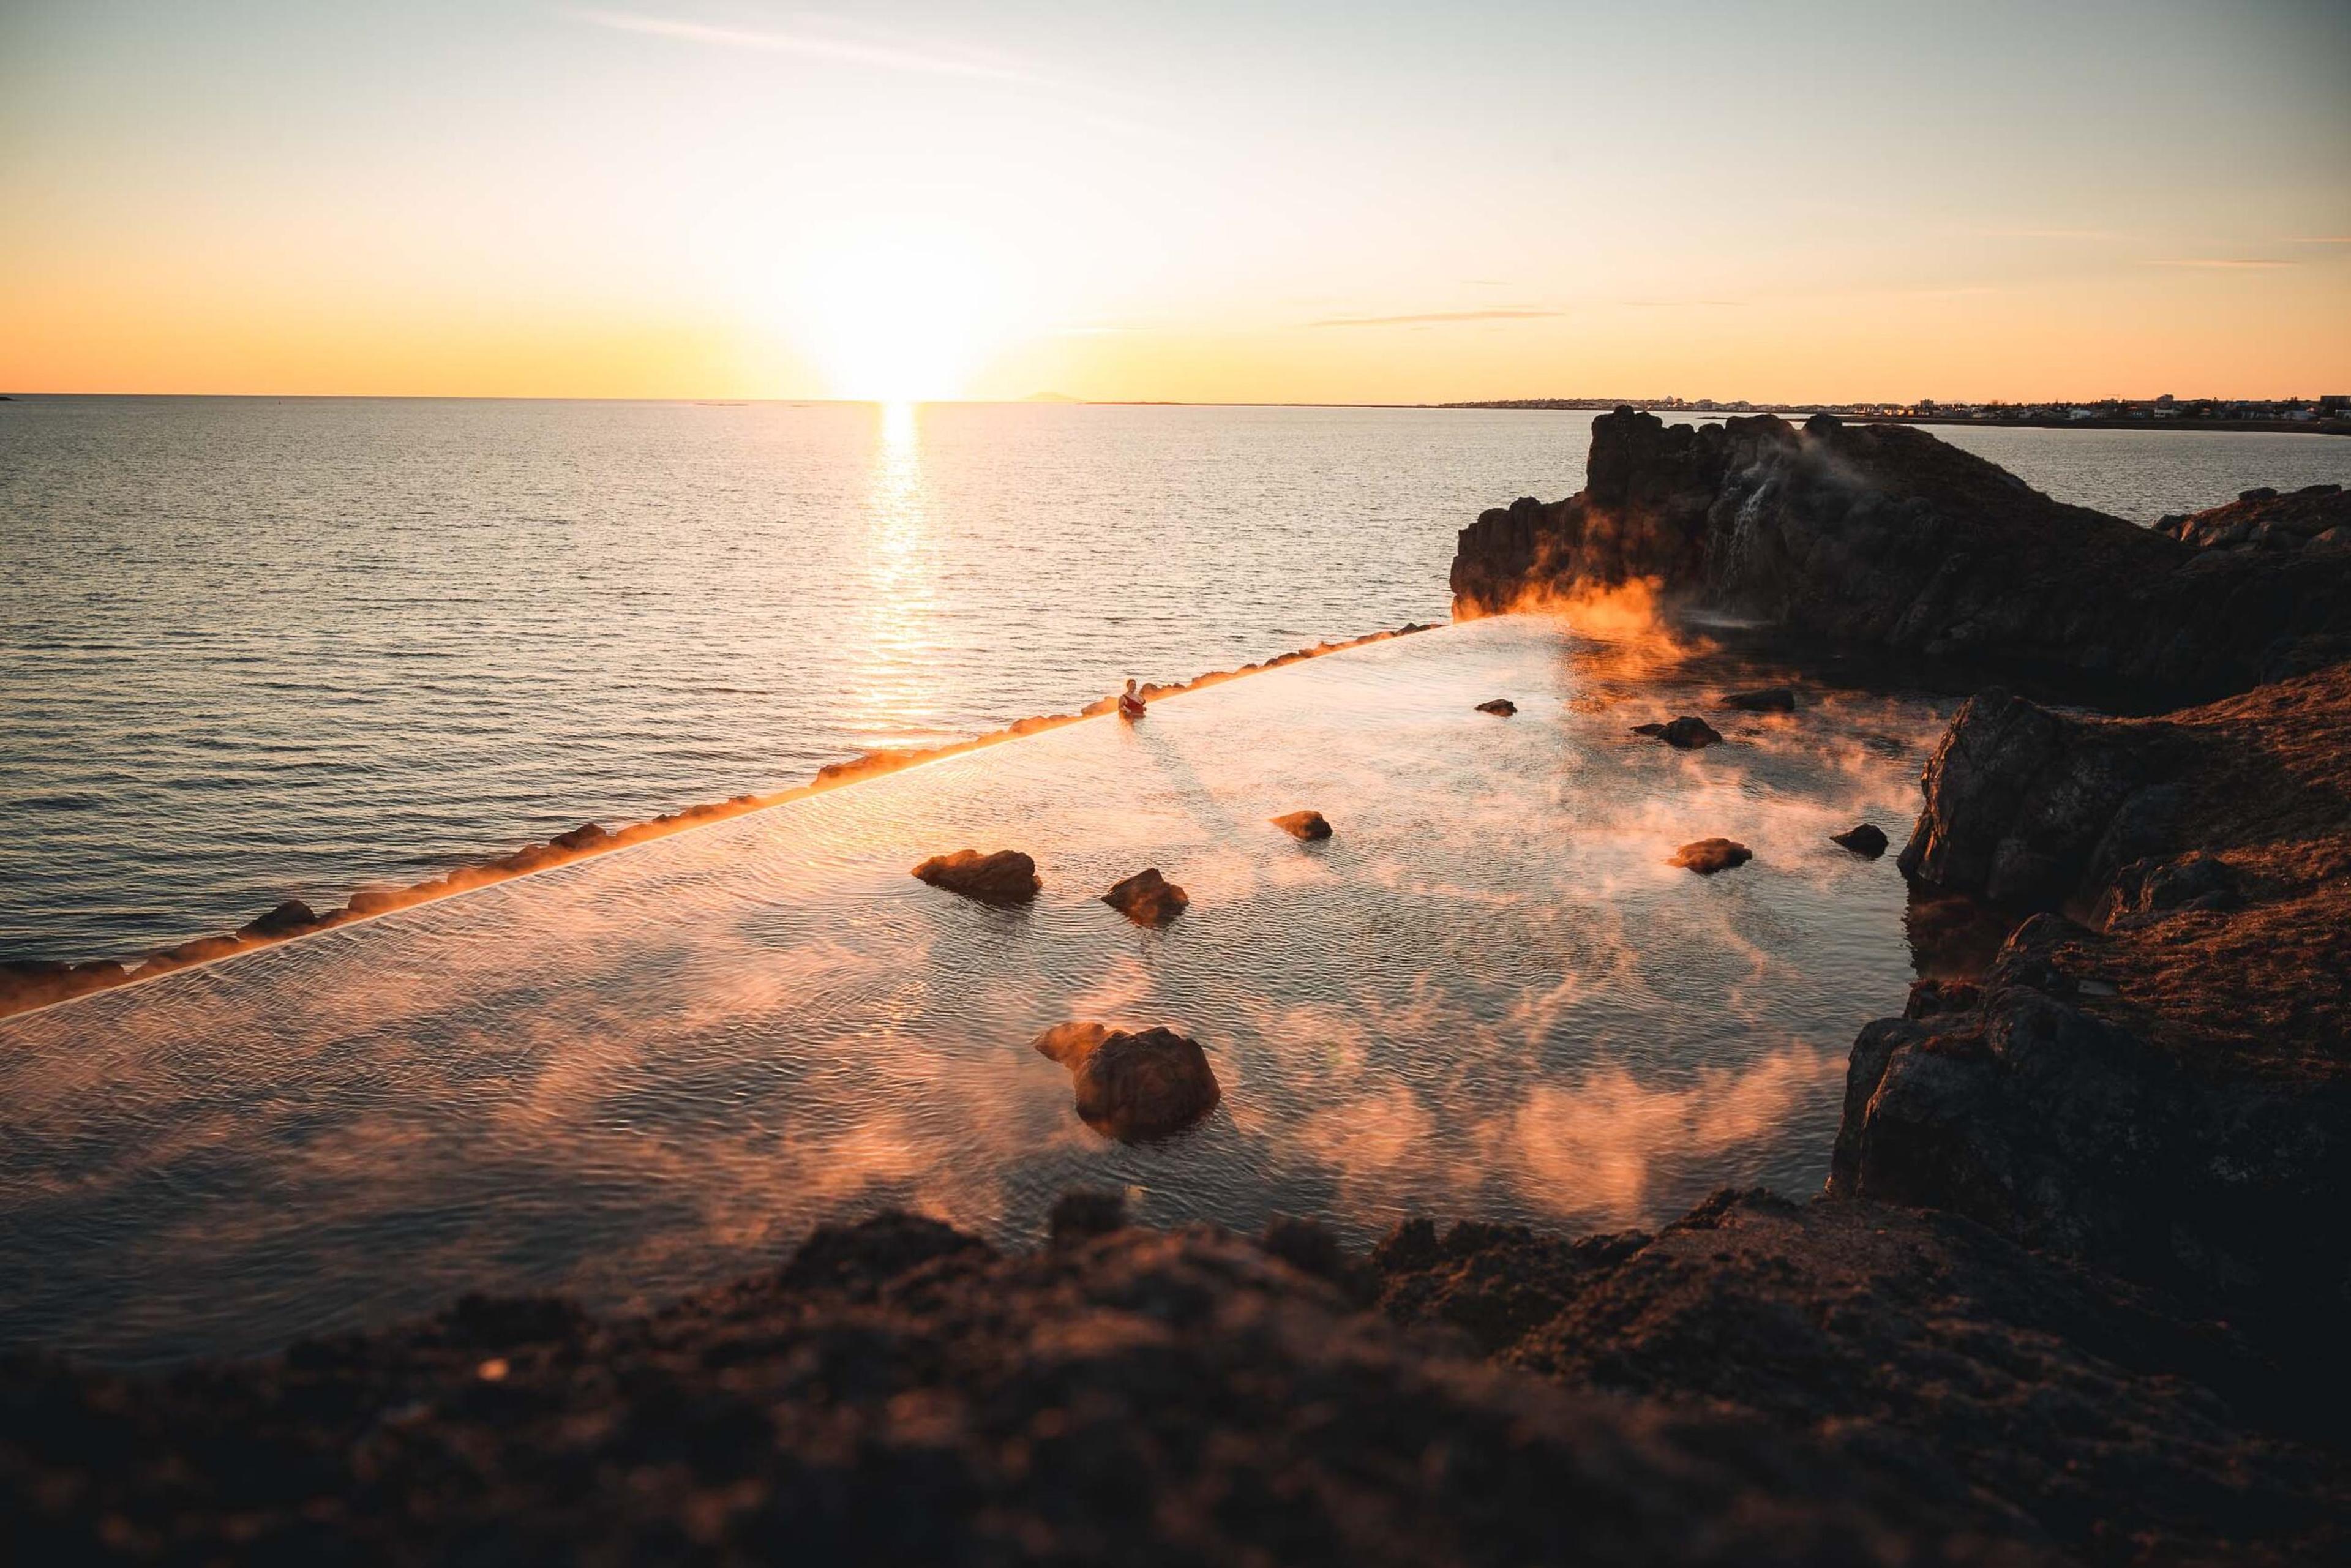 An infinity-edge geothermal pool merging with the ocean under a golden sunset.